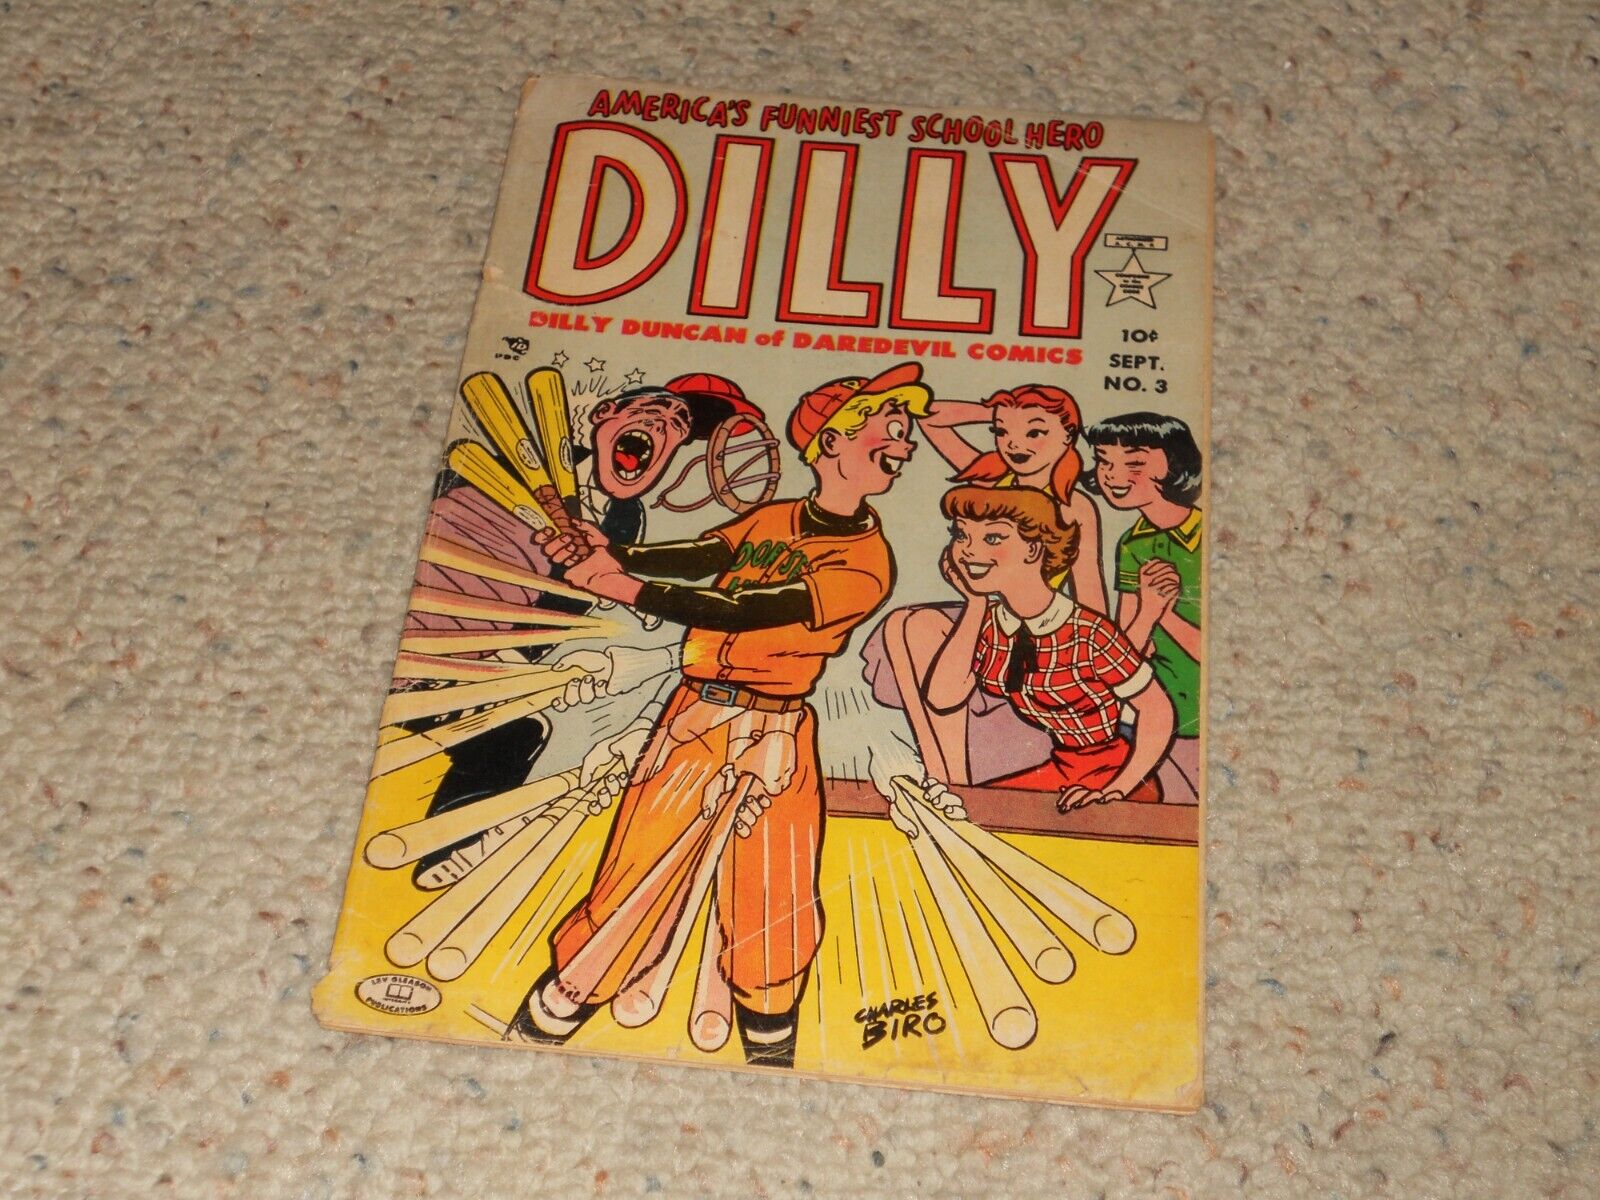 1953 DILLY DUNCAN Gleason Comic Book #3 - THE CARNIVAL QUEEN KIDNAPPING